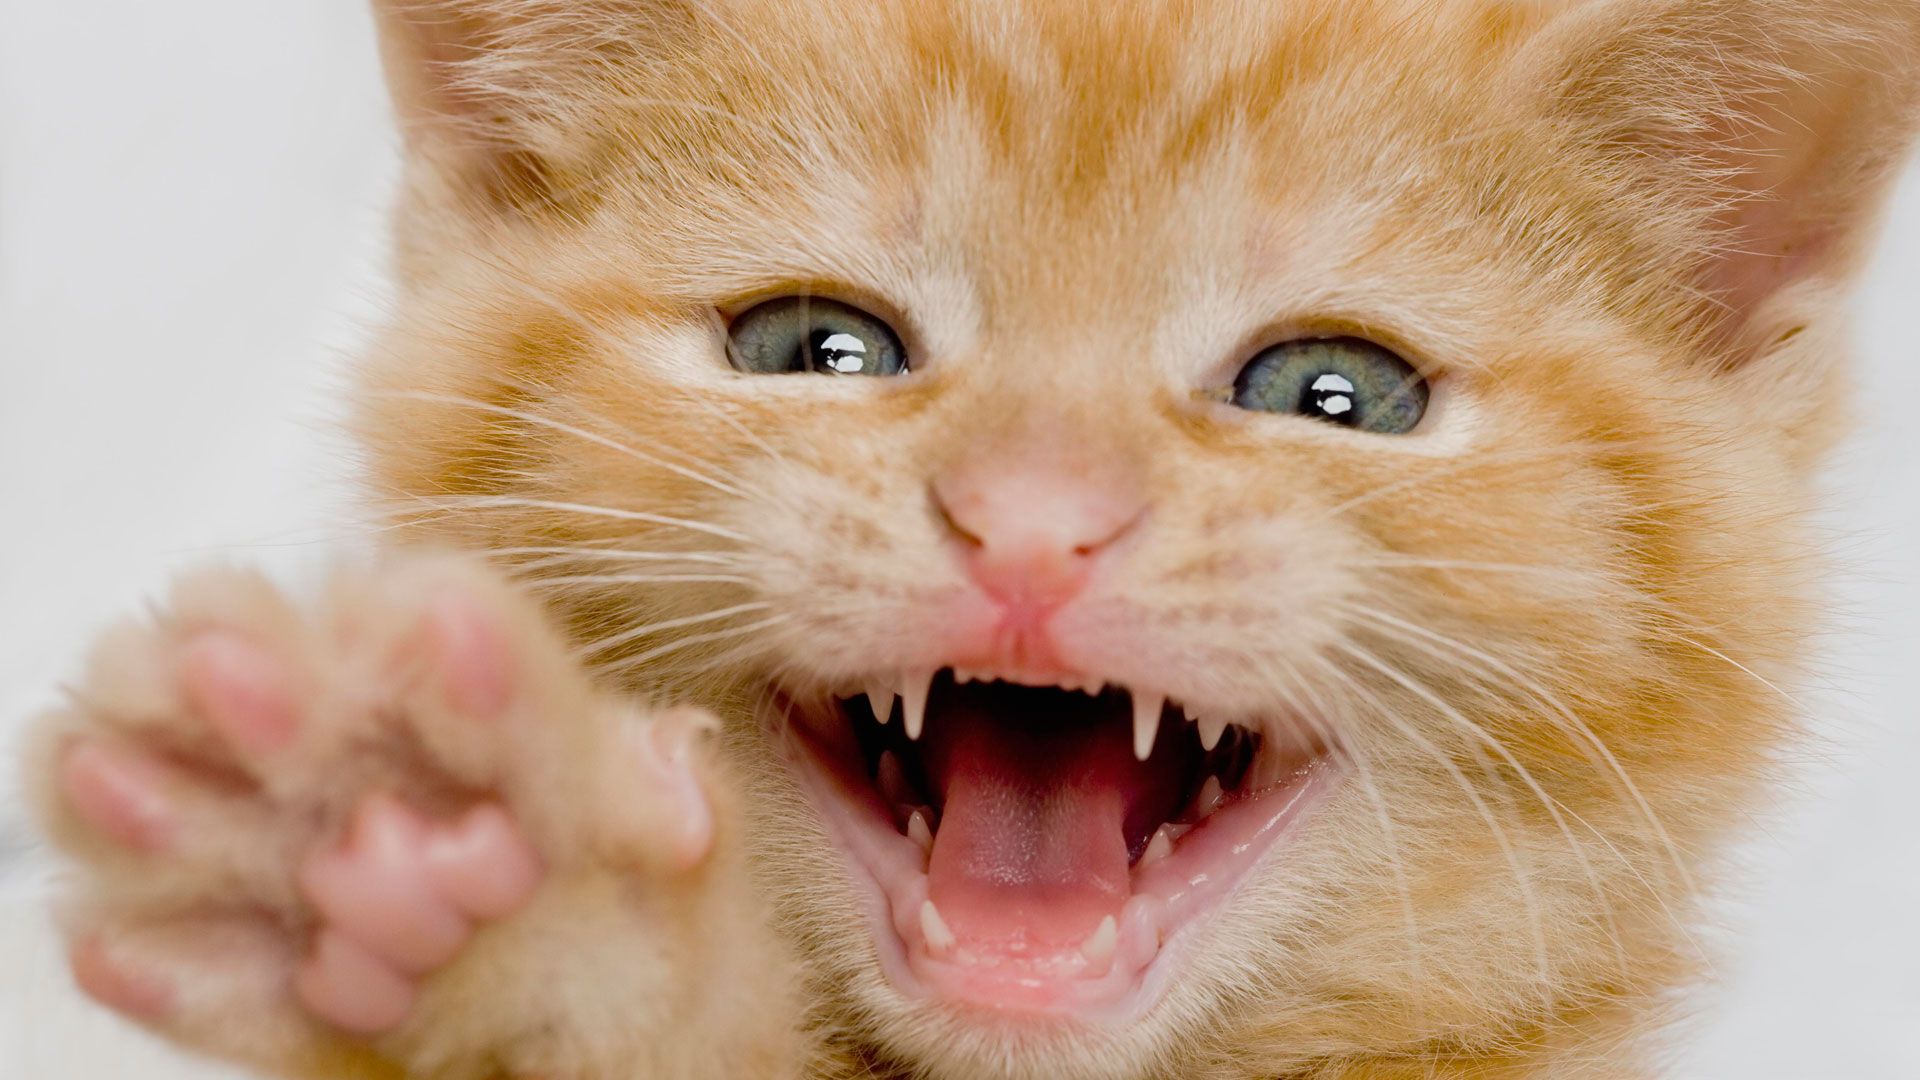 <p>                     Cats are born with fewer teeth than they eventually have as adults, starting off with 26 milk teeth which are replaced by 30 adult teeth once the cat reaches maturity. Cats use their teeth for grooming as well as hunting and eating, so they have a variety of shapes and sizes of teeth in their mouths.                   </p>